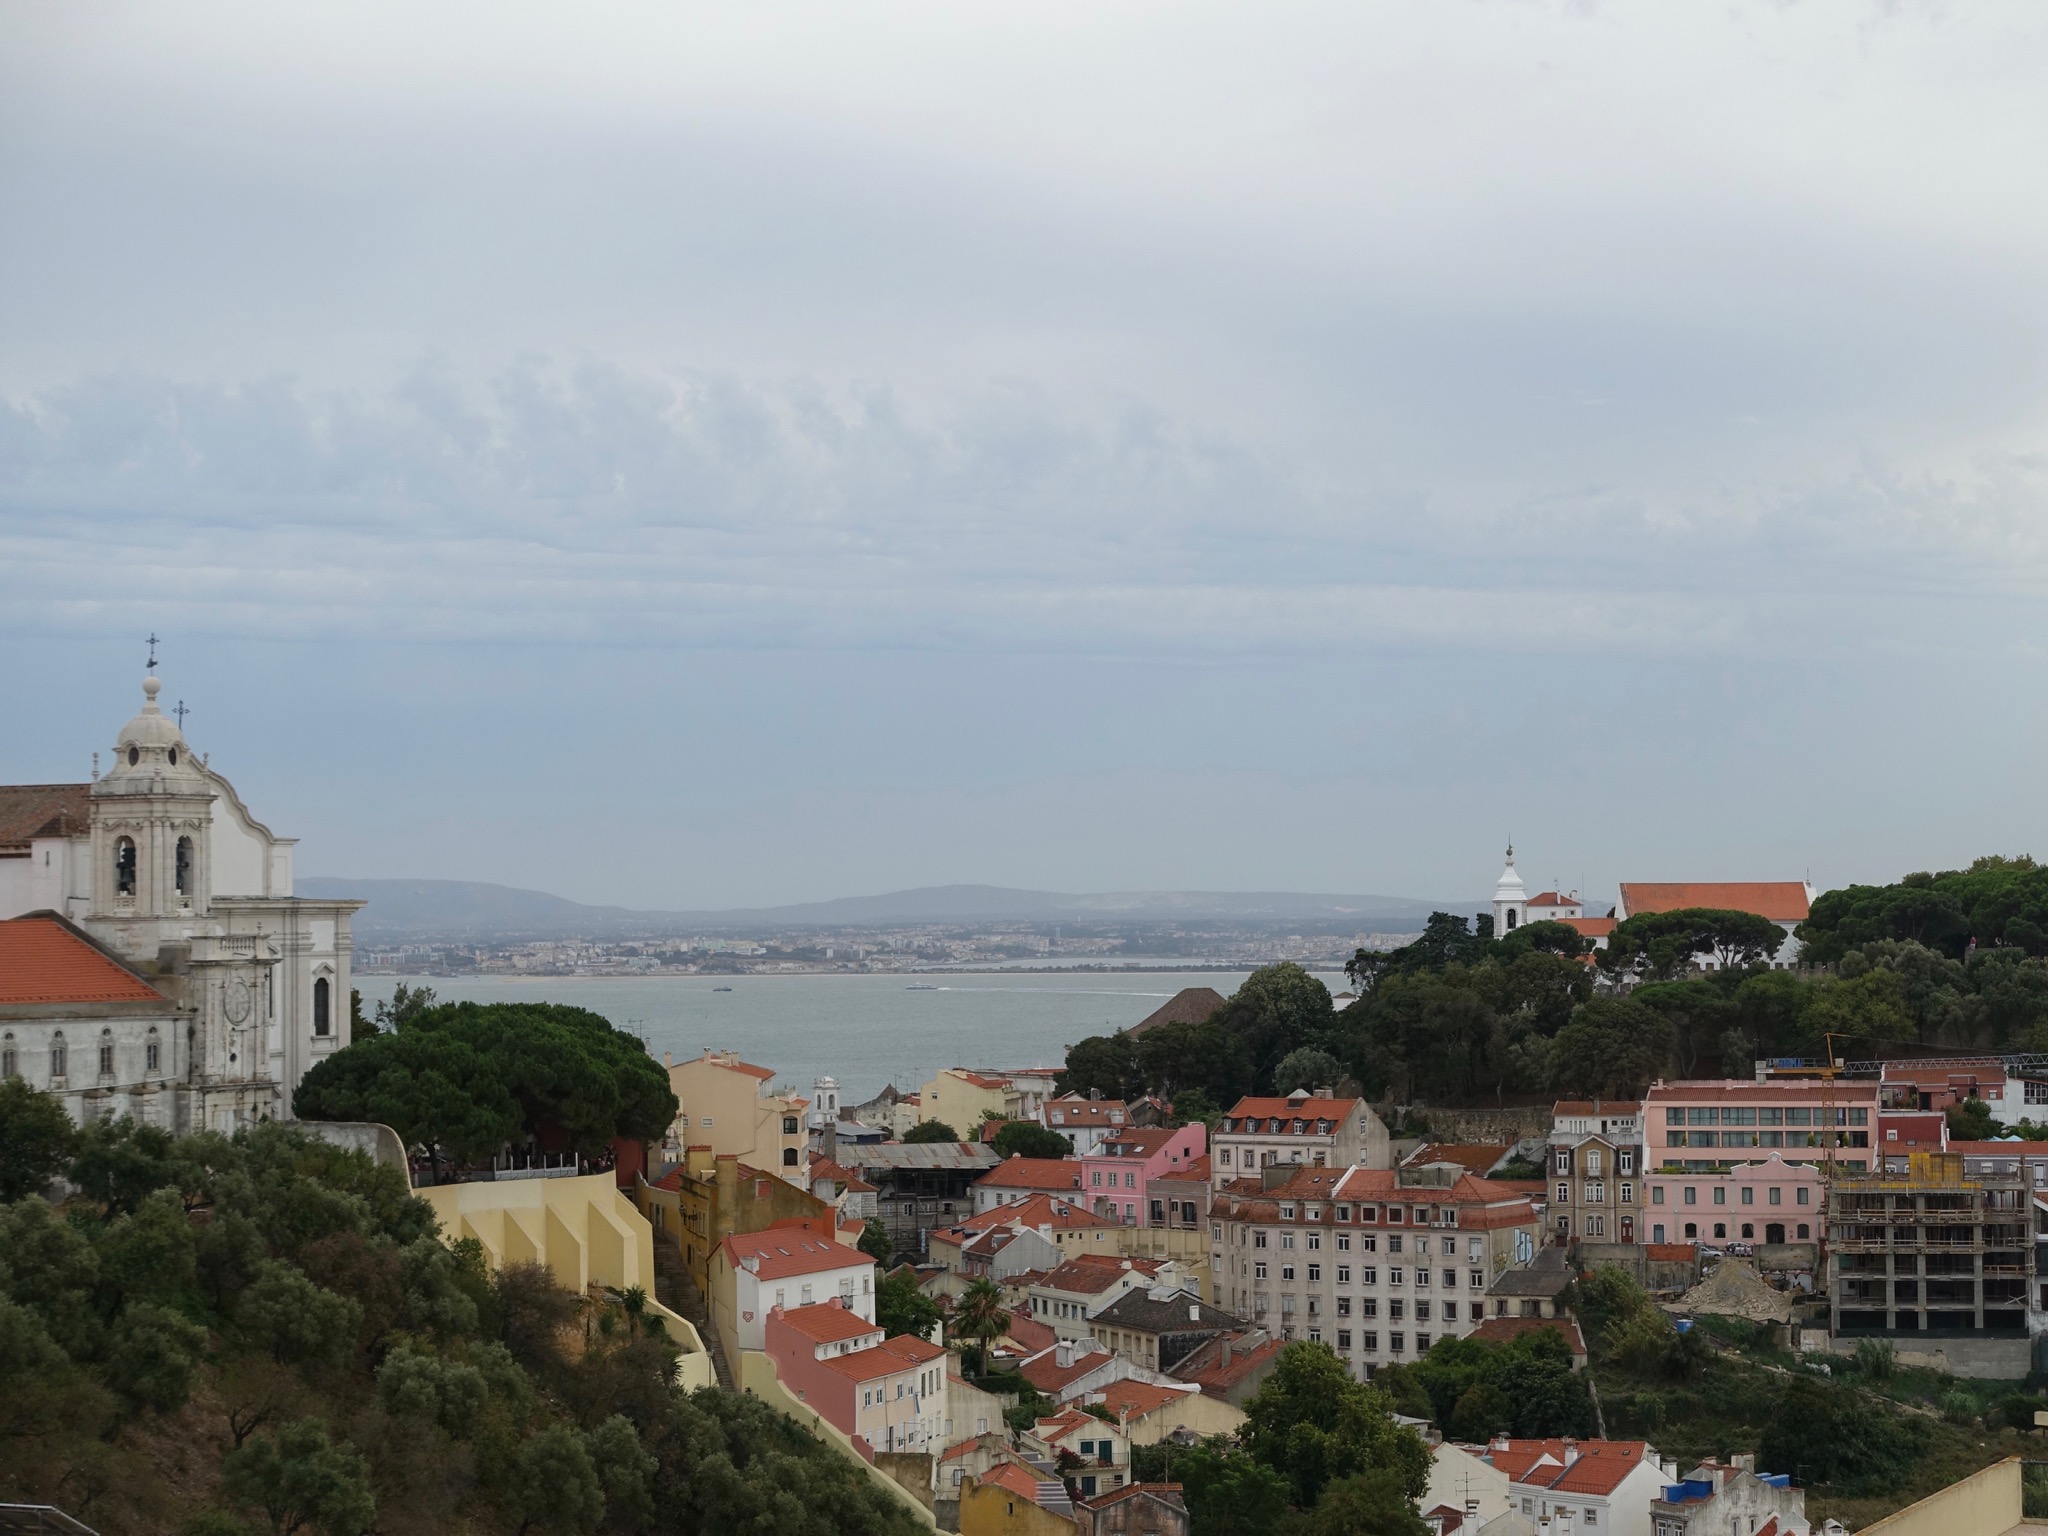 Photo 12 of 86 from the album Highlights Lisbon 2015.